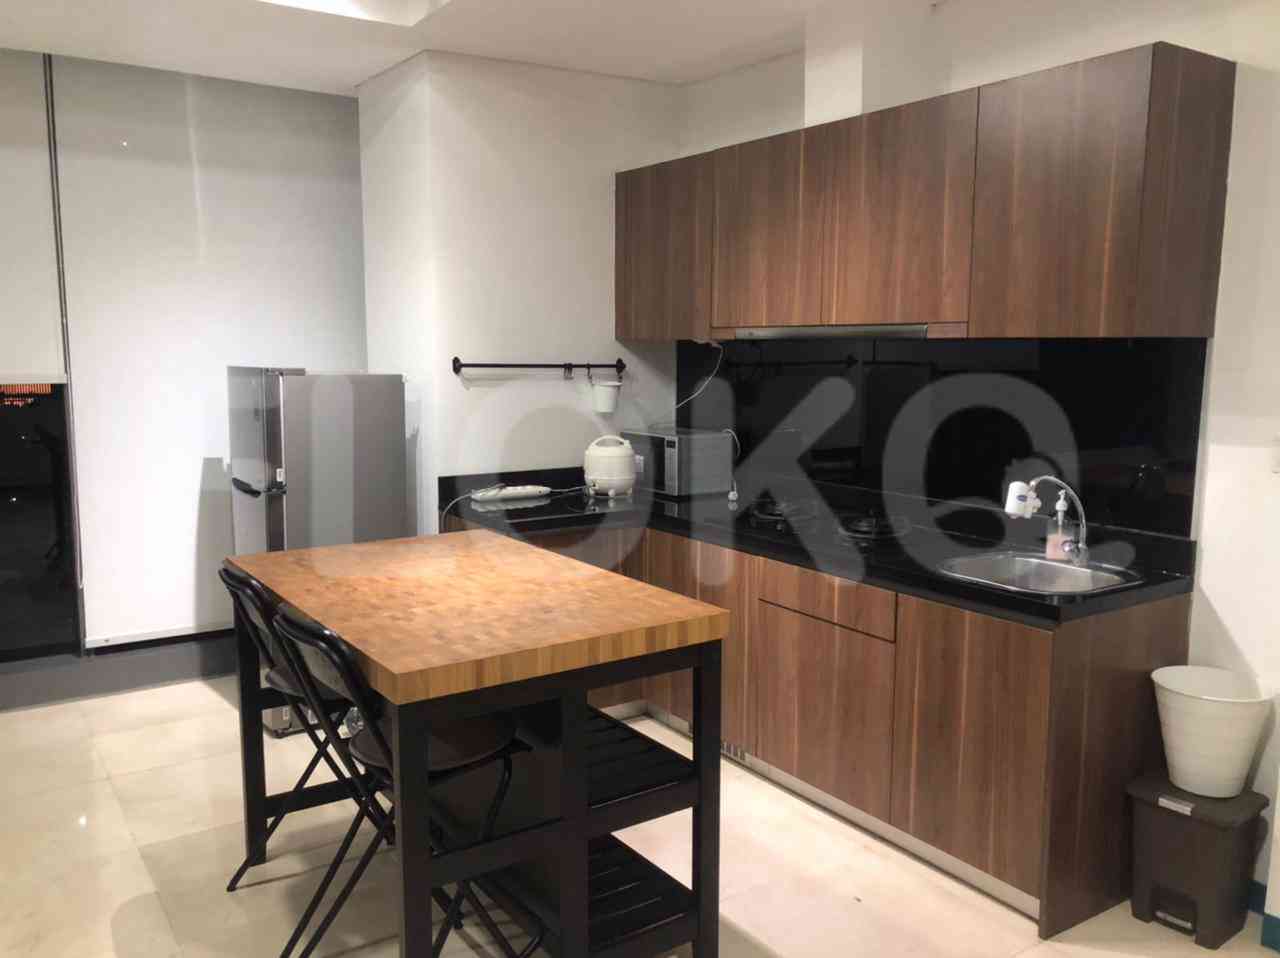 2 Bedroom on 10th Floor for Rent in Lavanue Apartment - fpa157 2